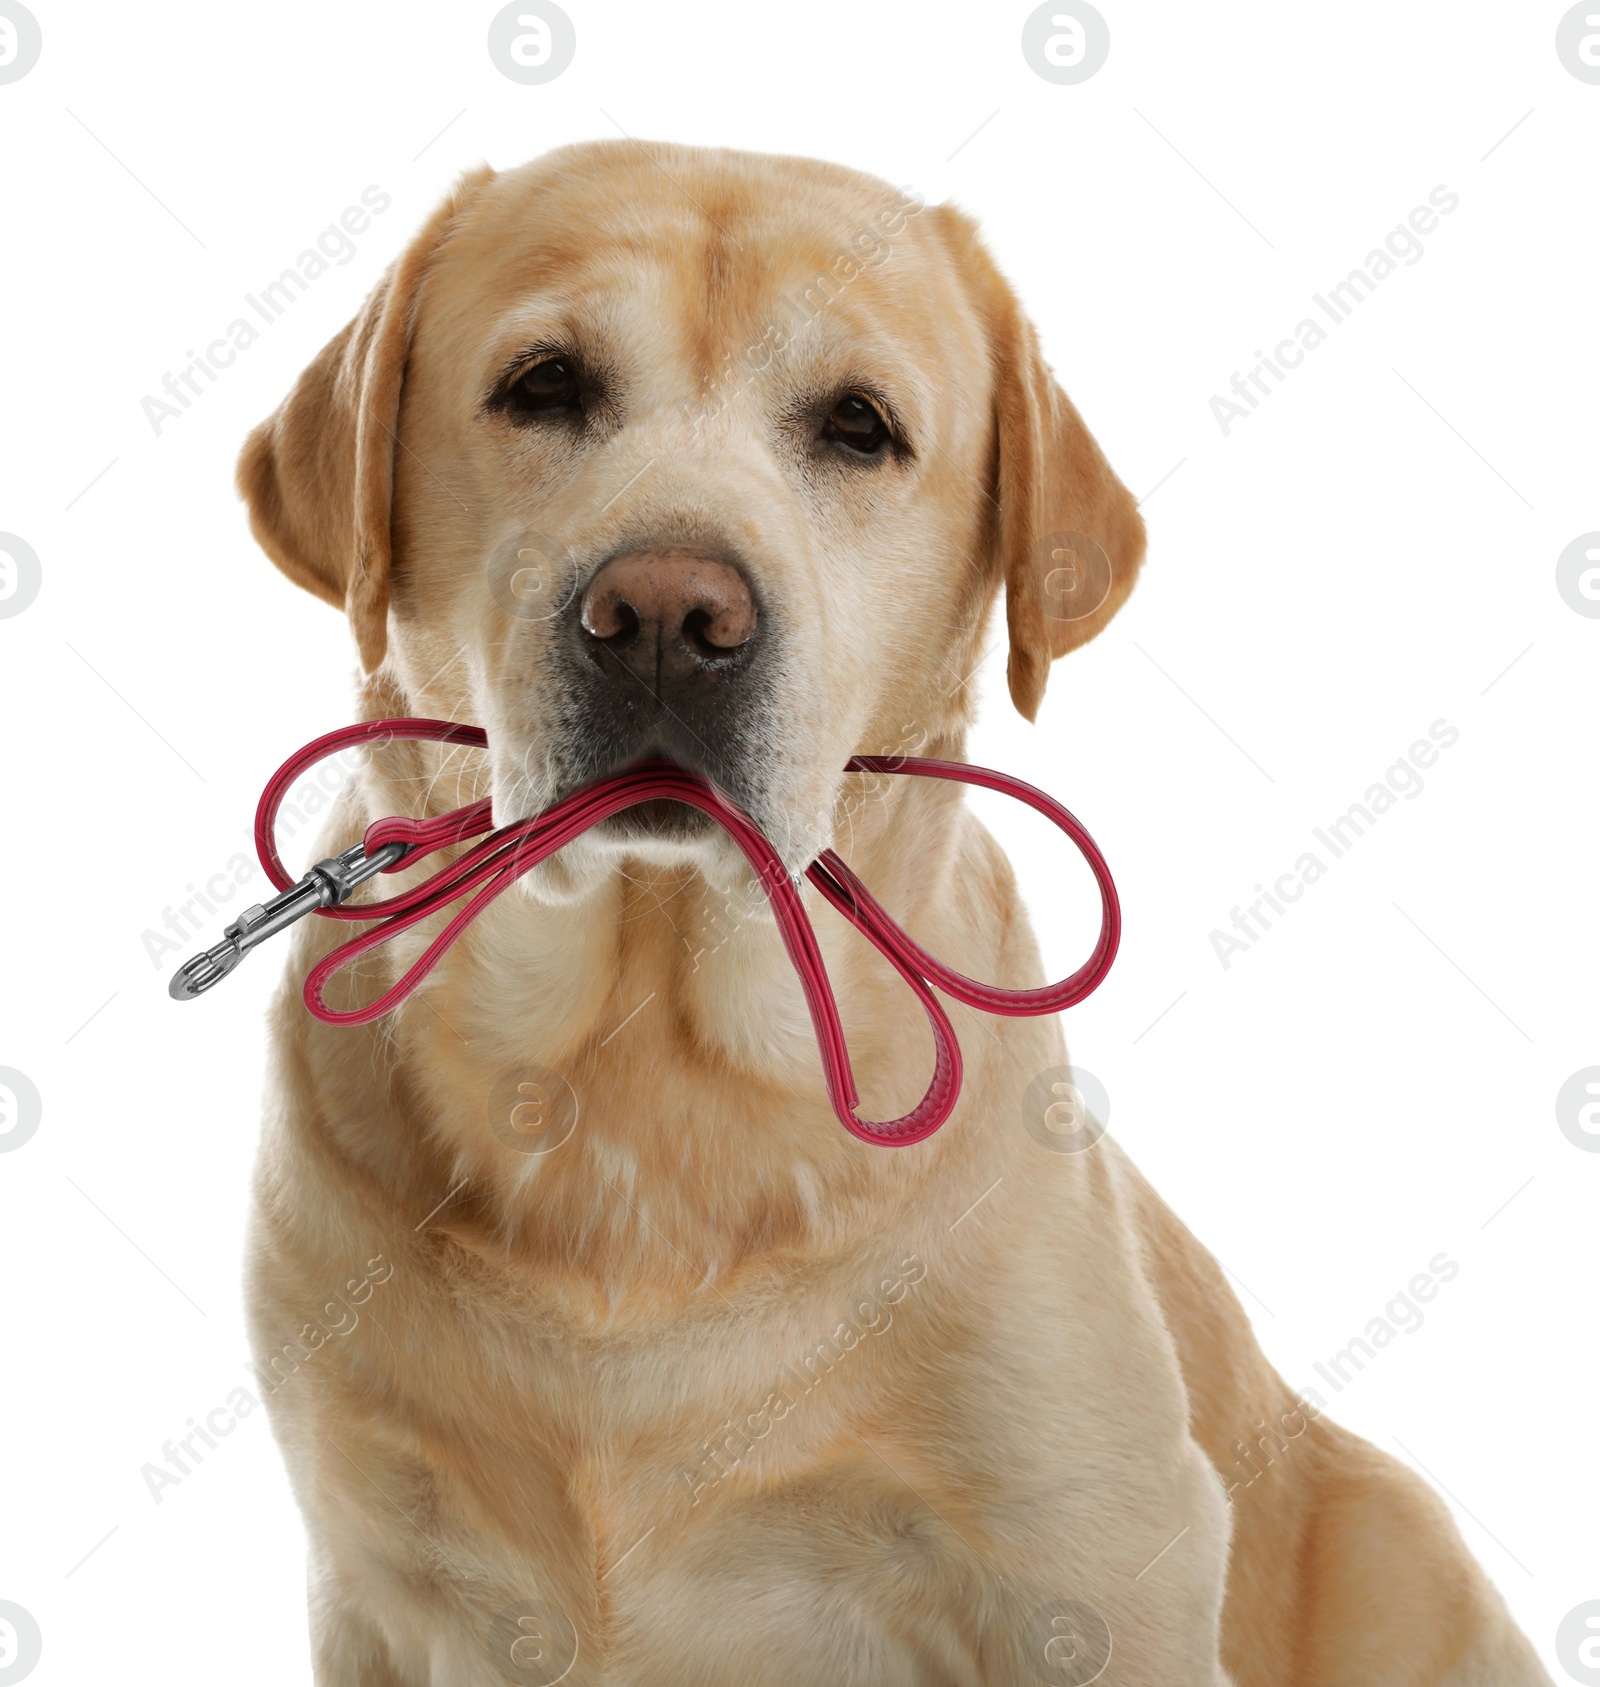 Image of Cute Labrador Retriever holding leash in mouth on white background